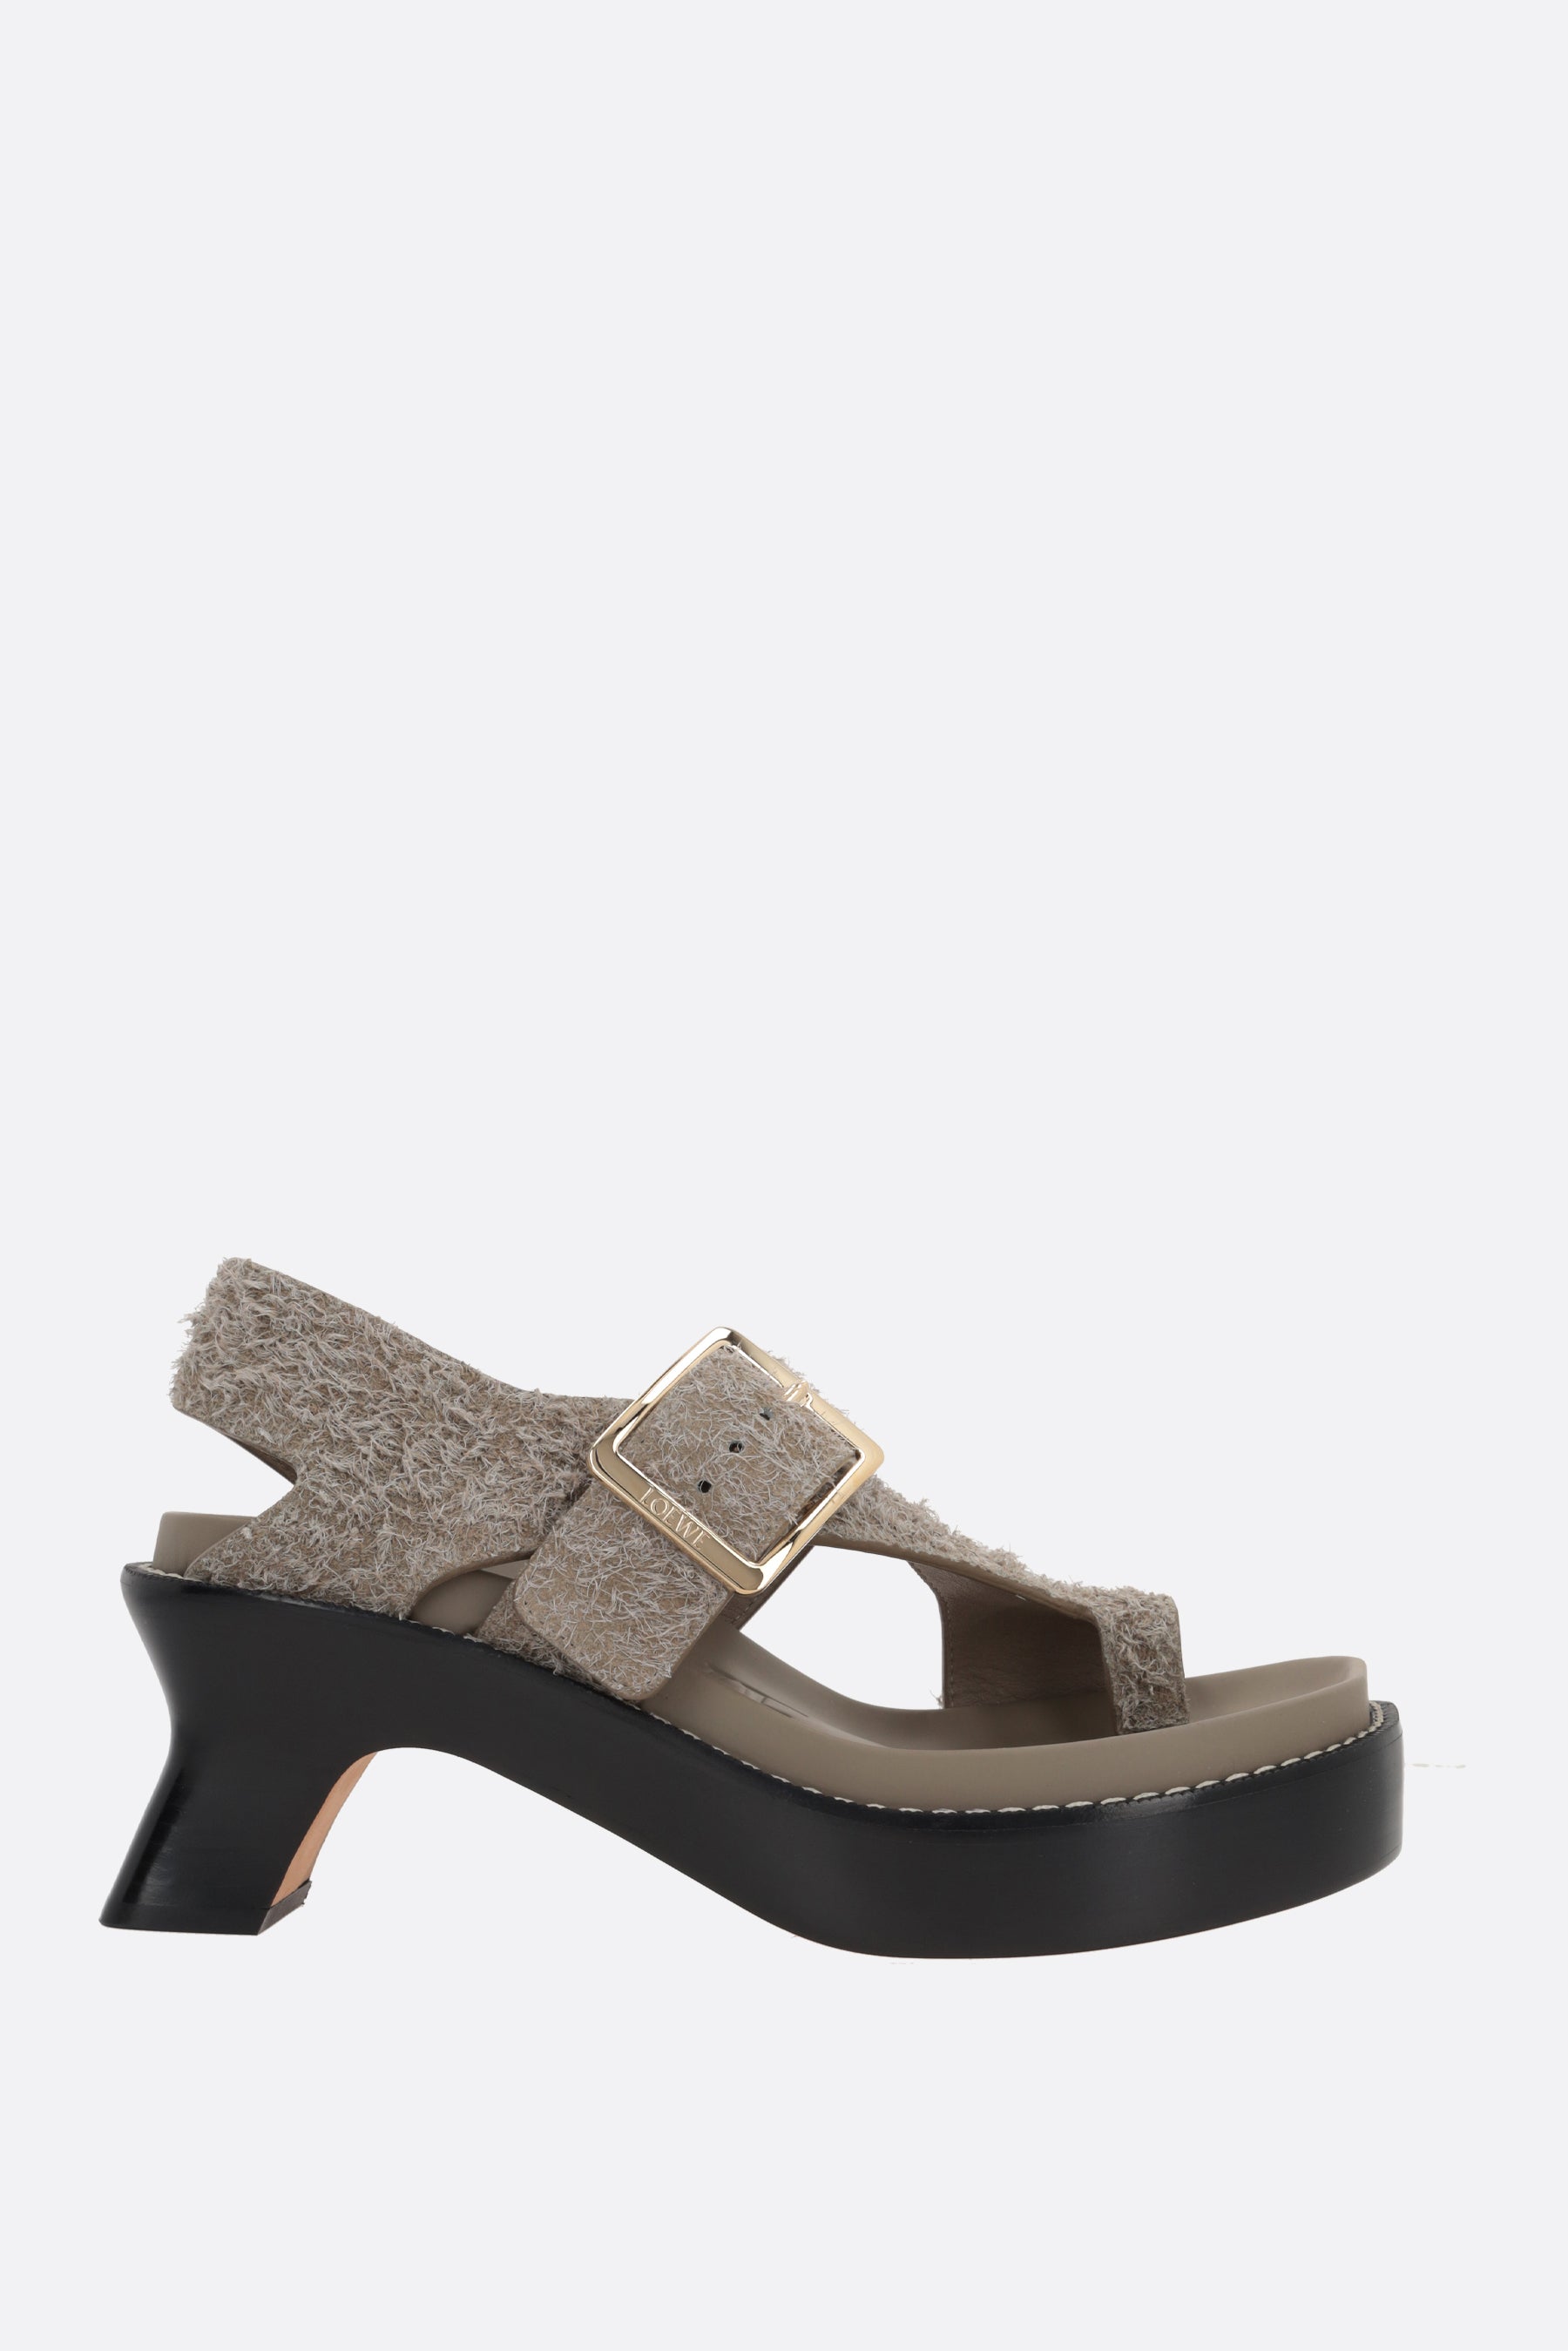 Ease brushed suede thong sandals